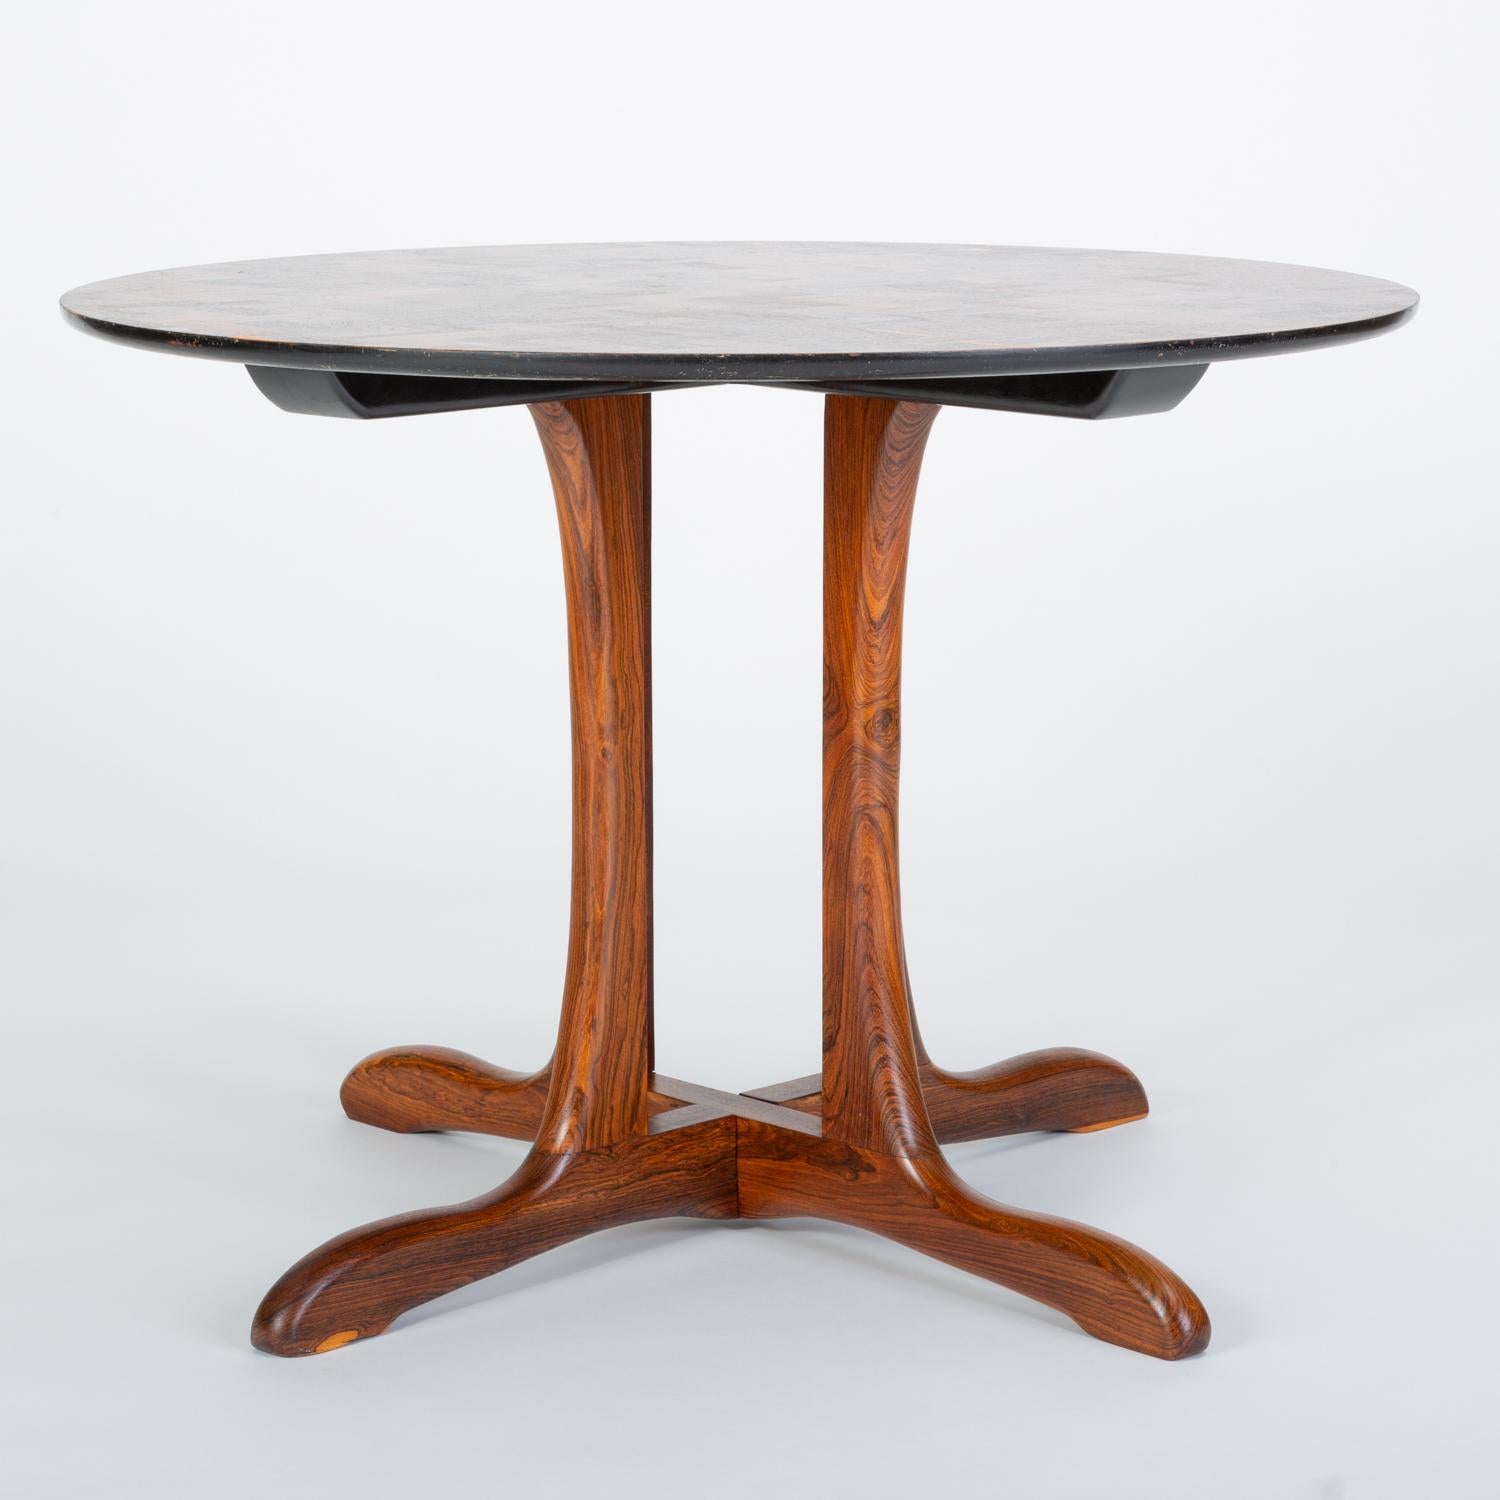 An F-12 dining table from Don Shoemaker’s Sling Collection, this round table makes an intriguing statement from any angle. The tabletop is supported by a deeply recessed cluster of four sculpted legs in cocobolo, a Mexican rosewood variety, with